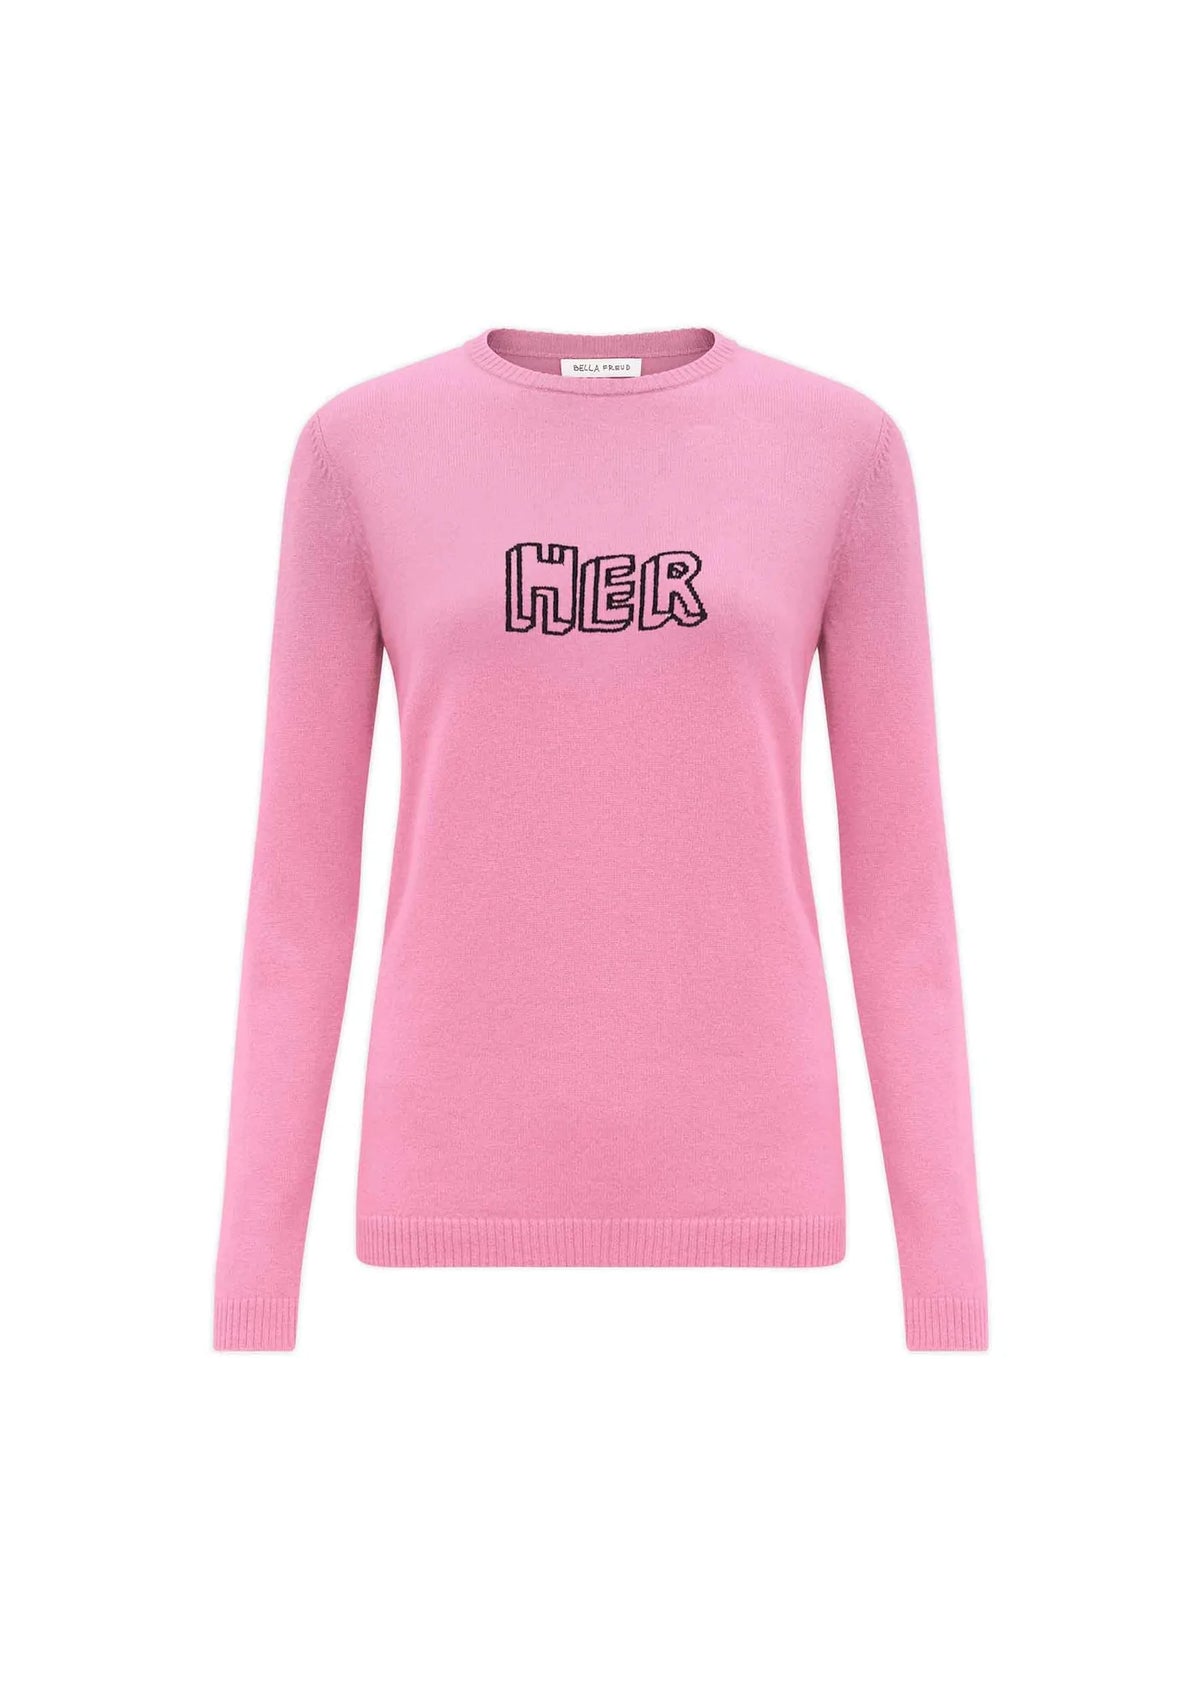 BF Her Jumper in Pale Pink